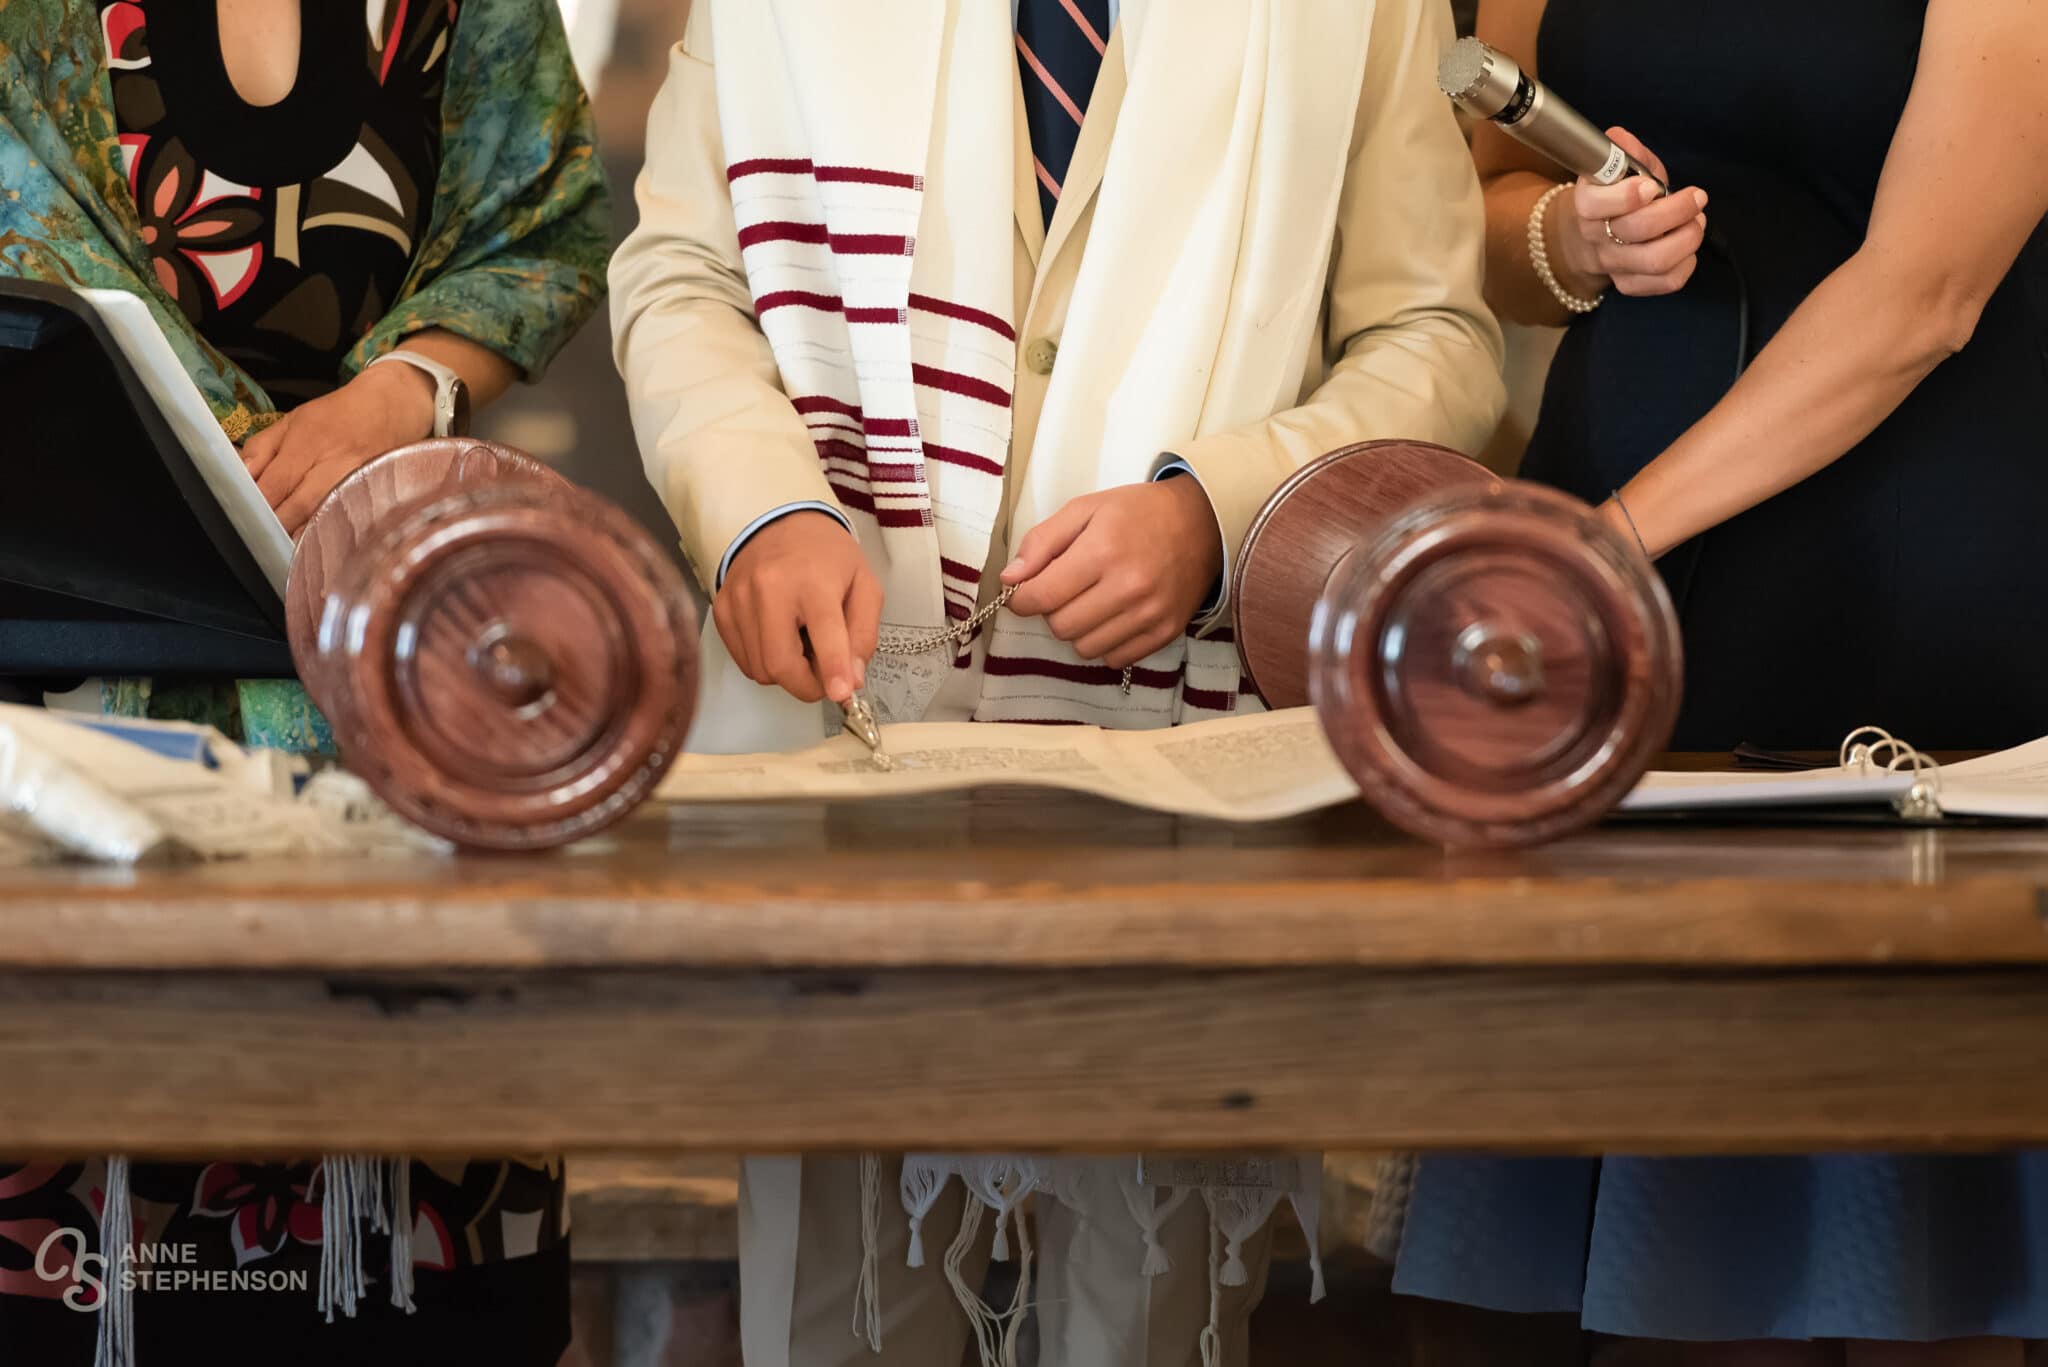 Close up view of the yad during the reading of the Torah at a Bar Mitzvah.